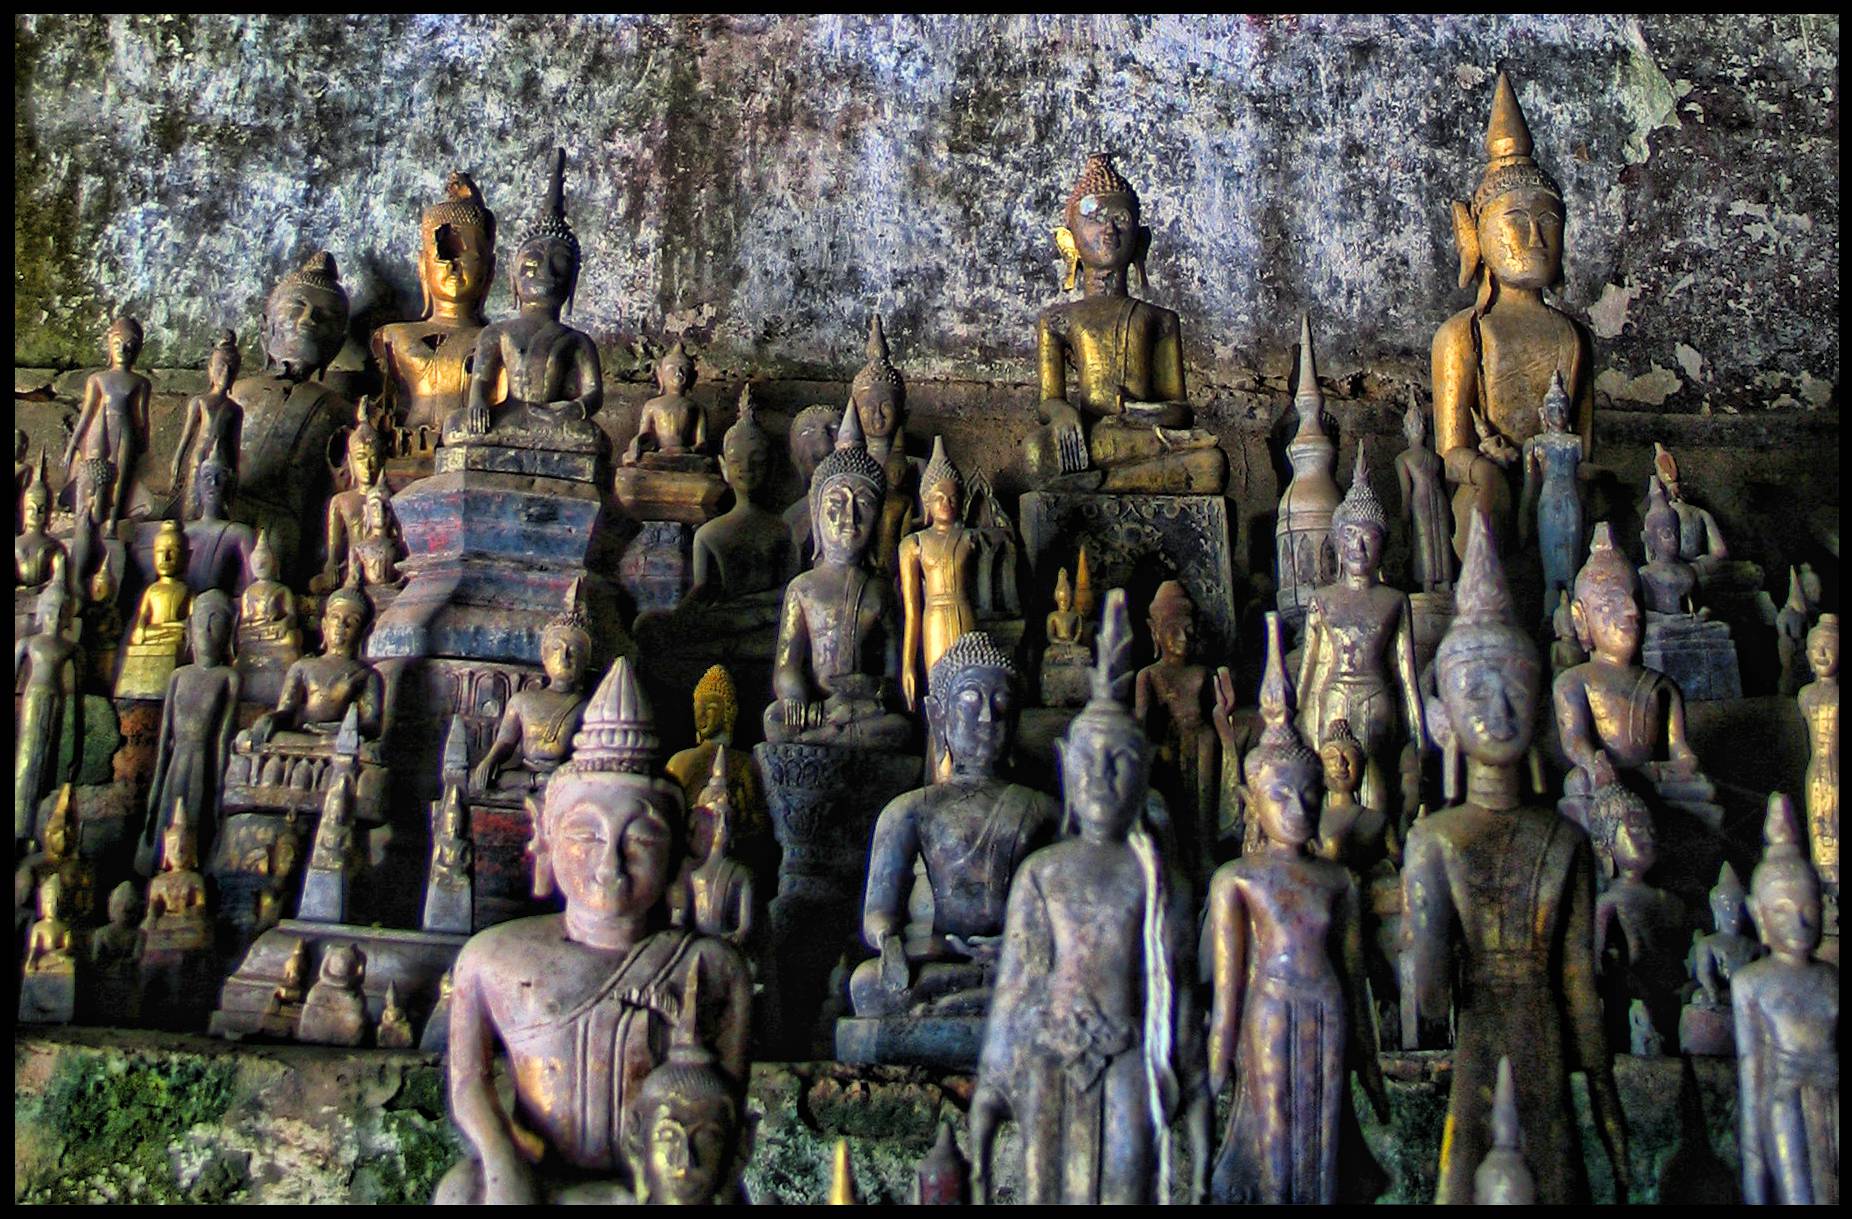 The massive collection of Buddha images